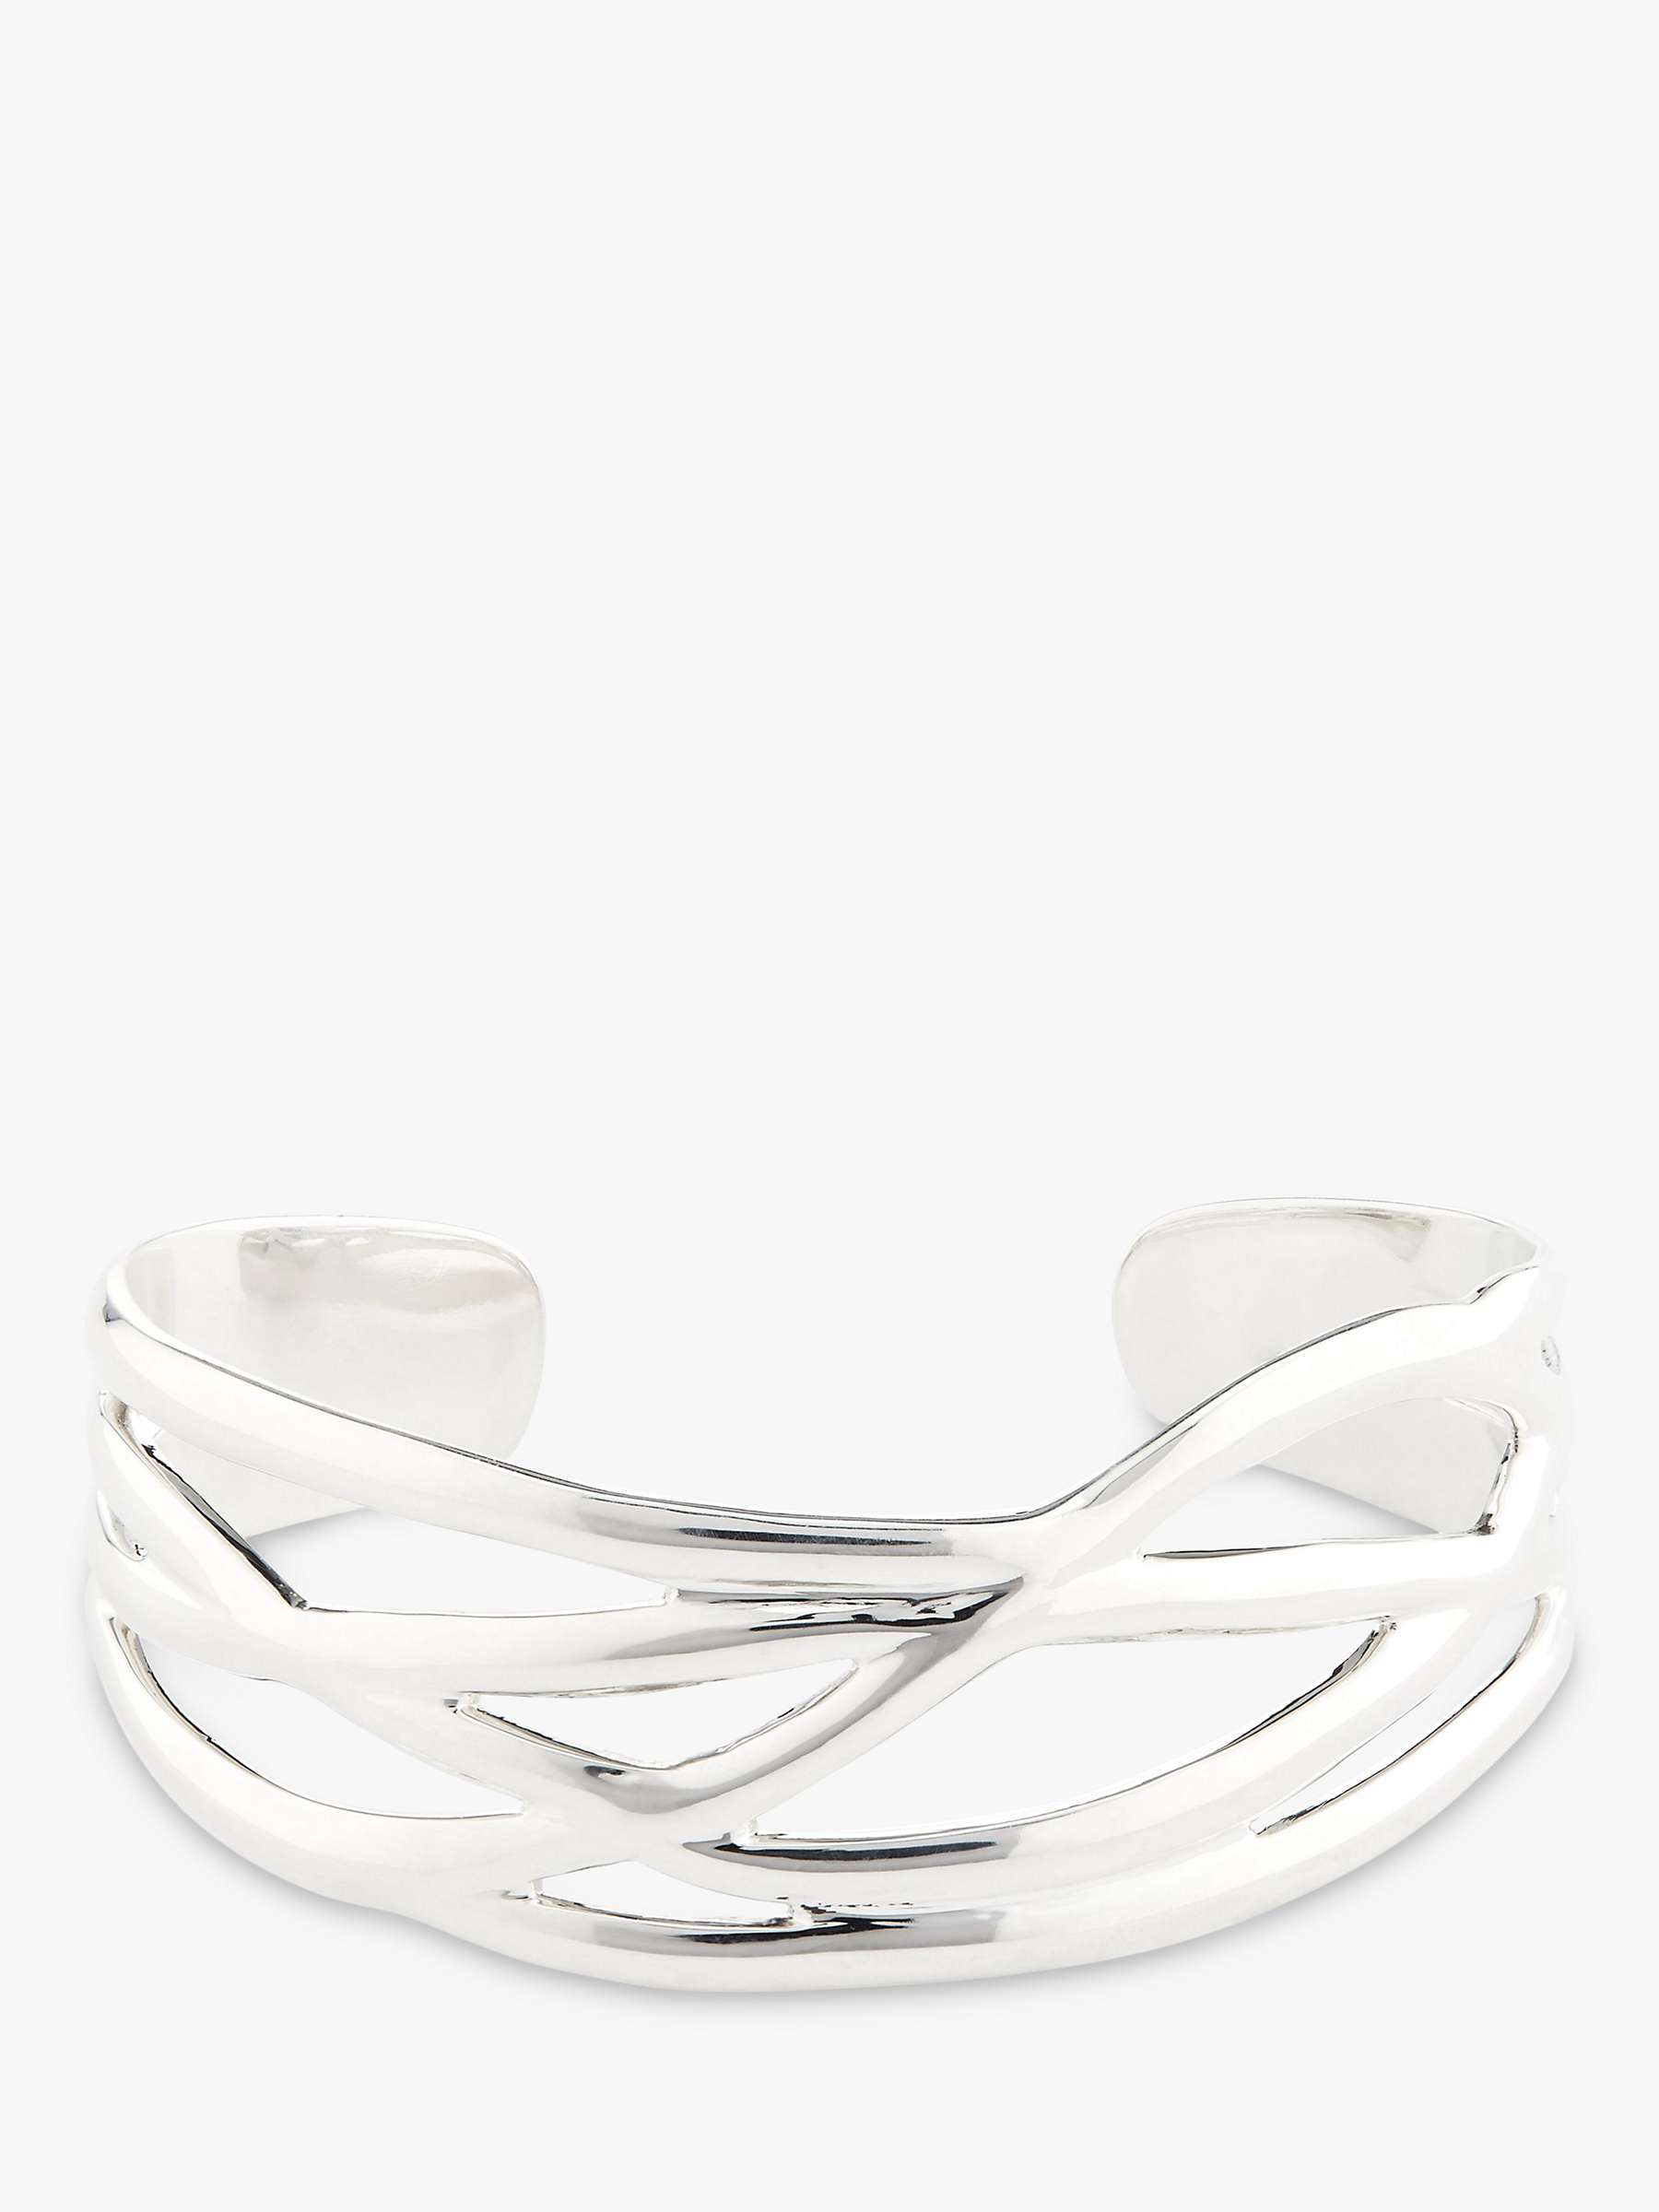 Buy Andea Sterling Silver Plait Cuff, Silver Online at johnlewis.com